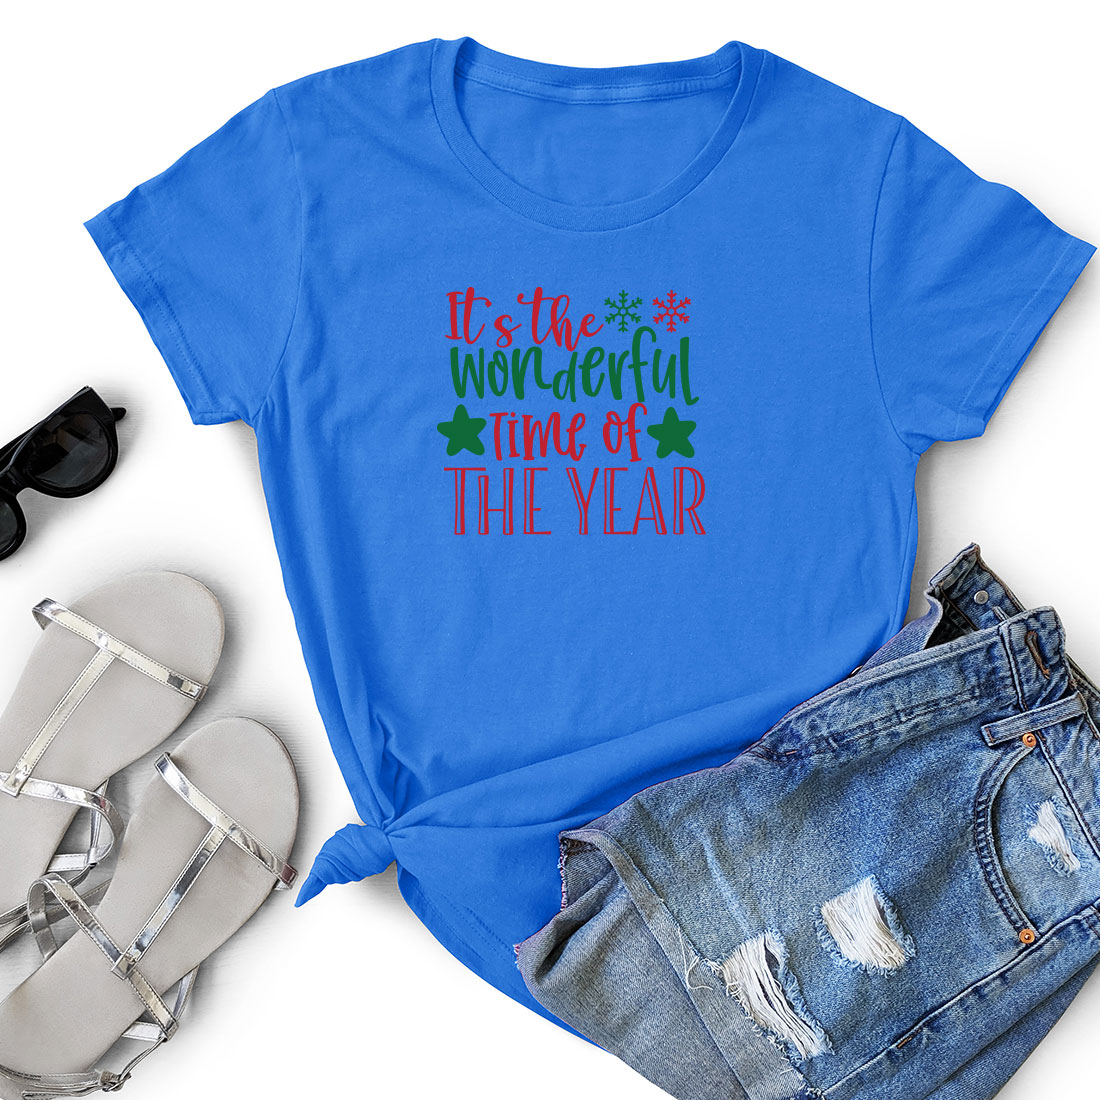 T - shirt that says it's the wonderful time of the year.